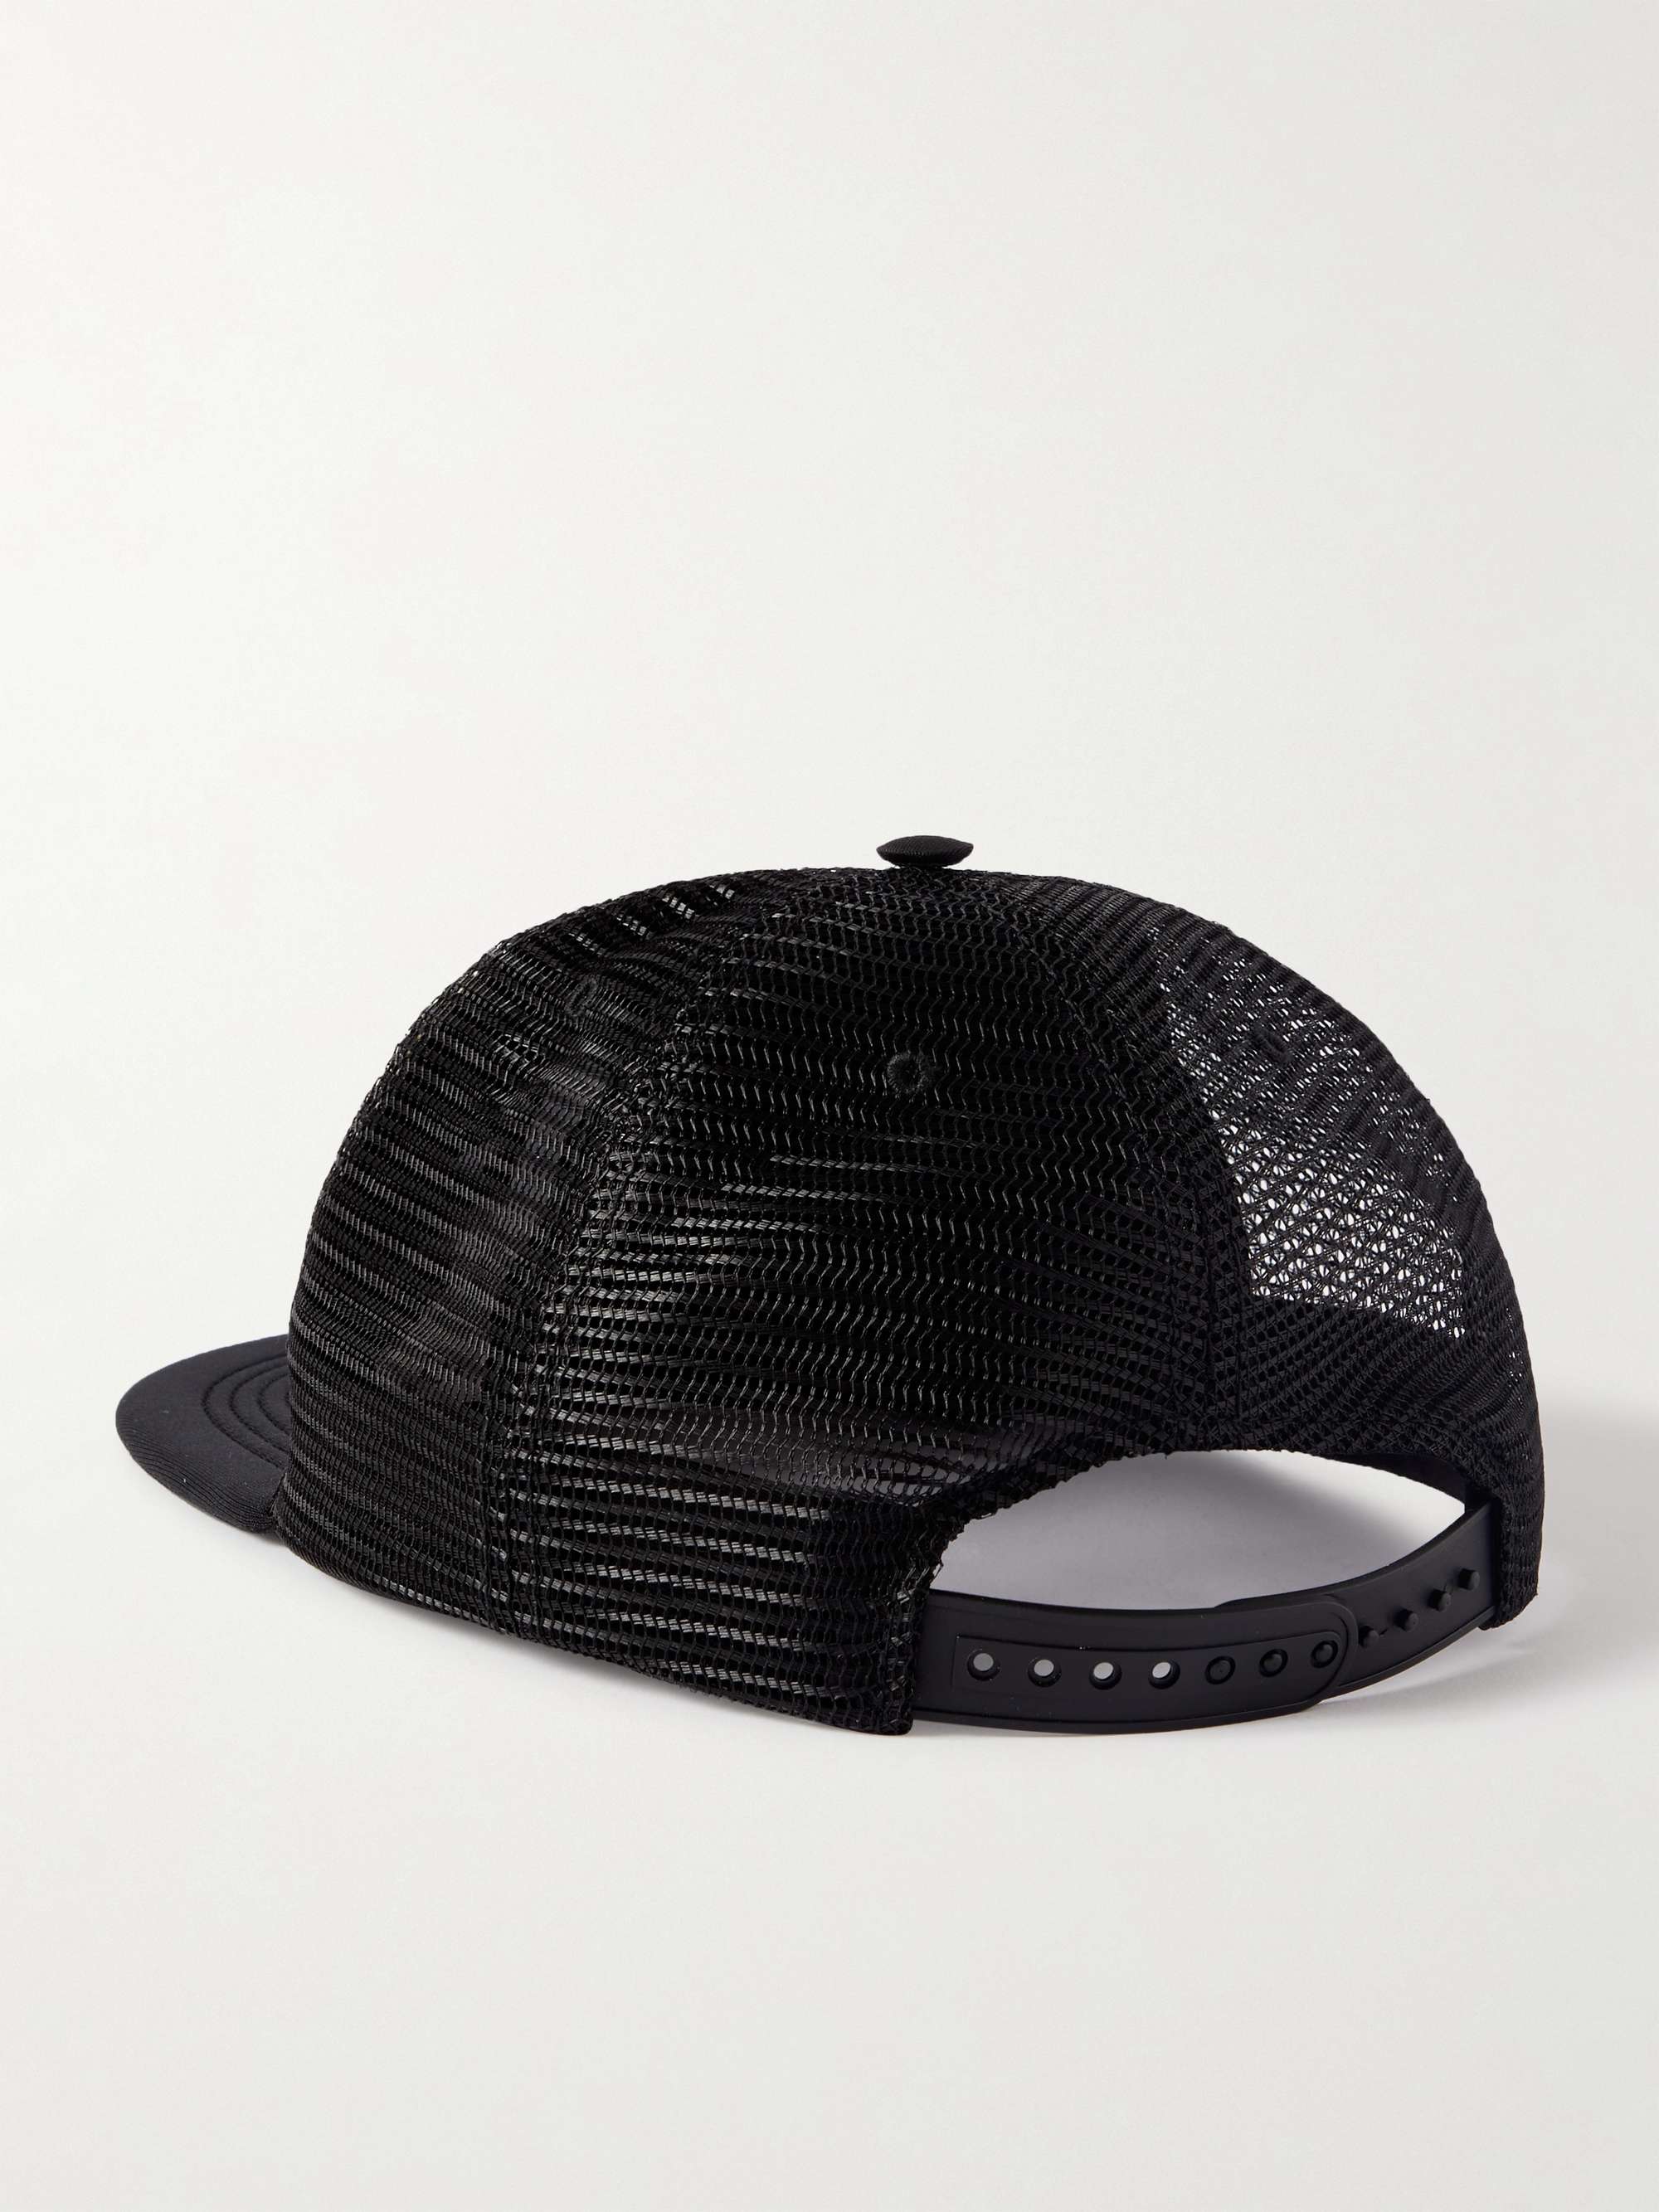 CELINE HOMME Cry Baby Printed Twill and Mesh Trucker Hat